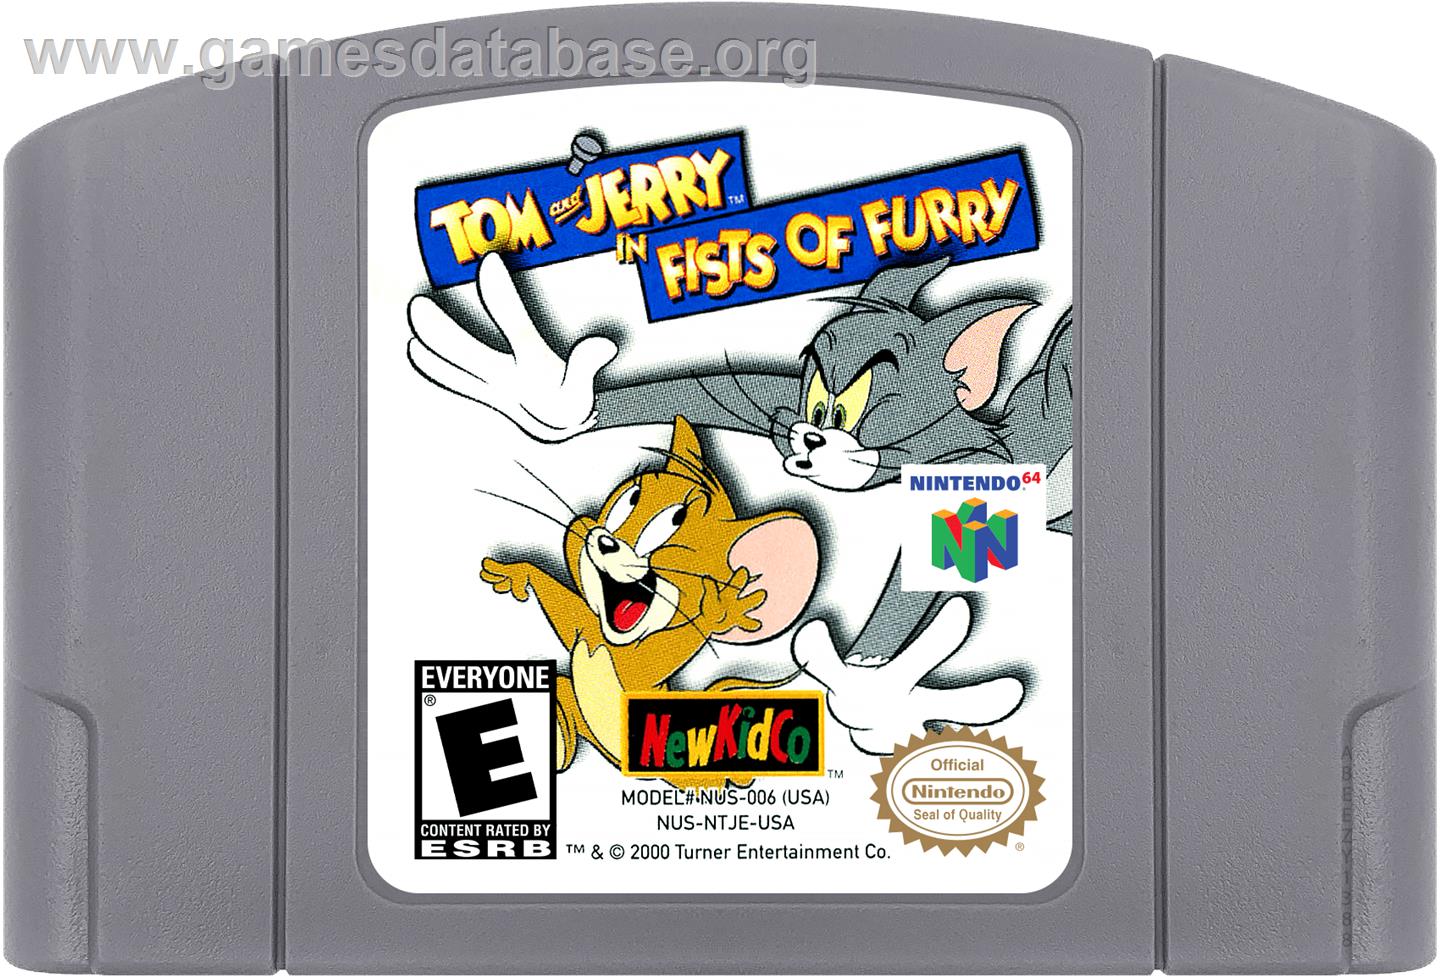 Tom and Jerry: Fists of Furry - Nintendo N64 - Artwork - Cartridge